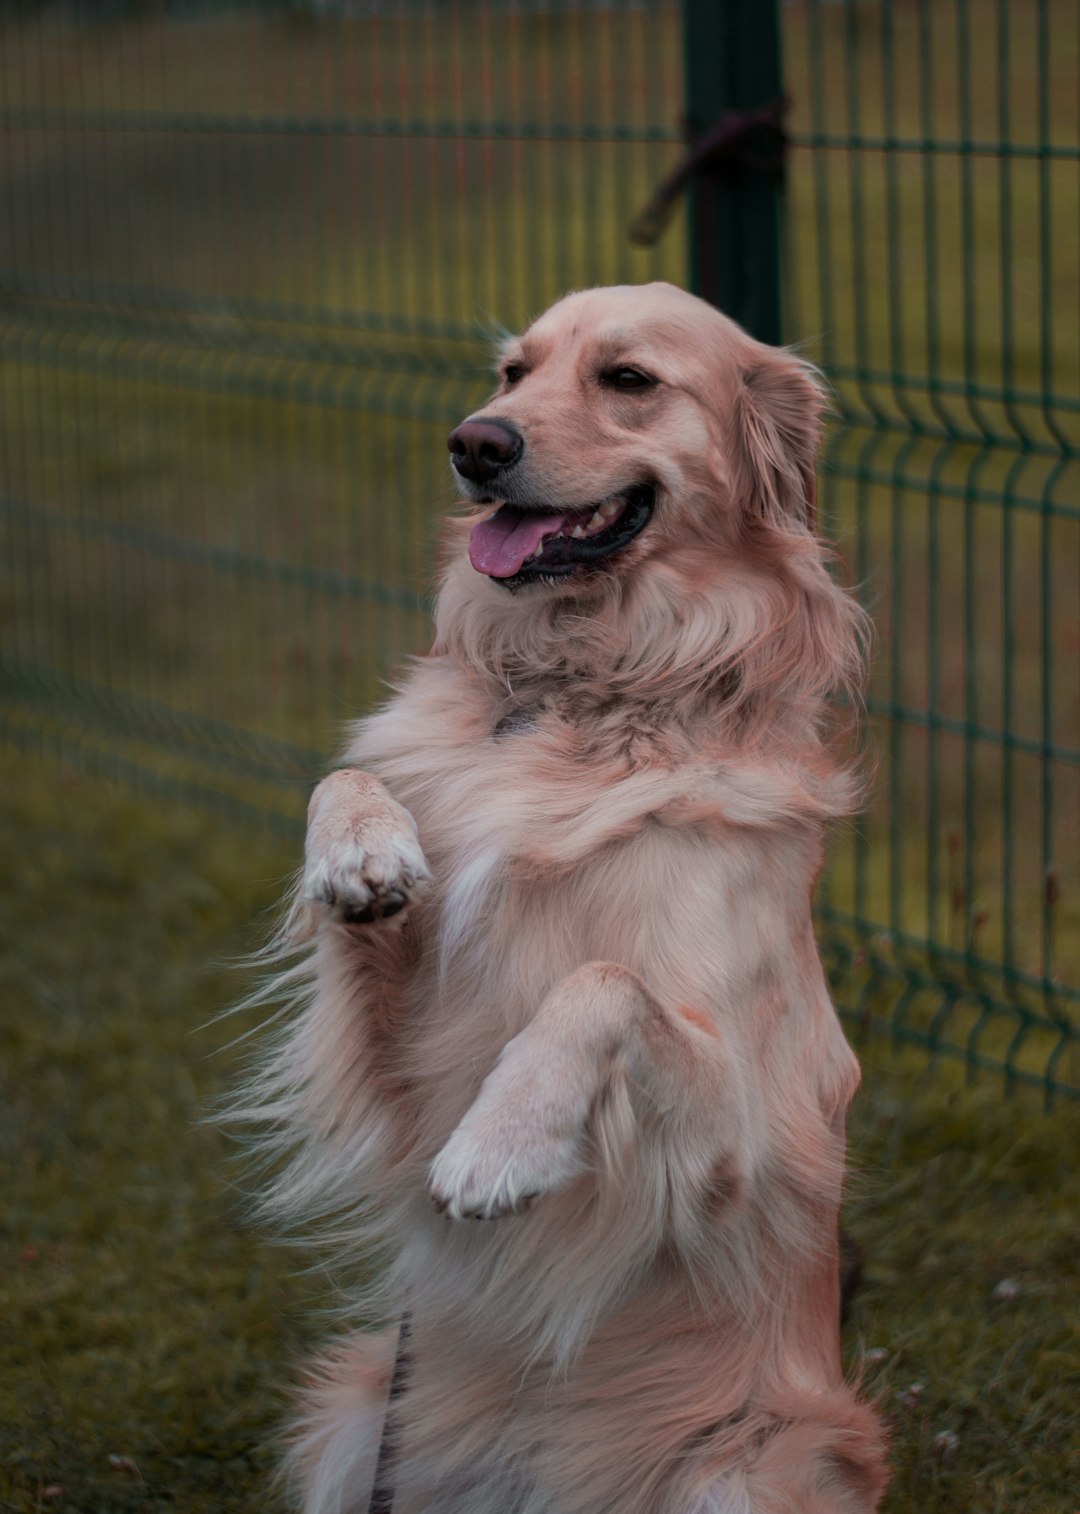 A golden retriever is standing on its hind legs, smiling and waving at the camera in an outdoor park with green grass behind it and a colorful mesh fence. The dog’s fur has long hair that flows down from under his paws, which adds to the softness of his appearance. He seems very happy about being outside and playing around. This photo was taken using a Canon EOS R5 mirrorless camera with a macro lens for a clear focused shot in the style of a Canon camera advertisement.